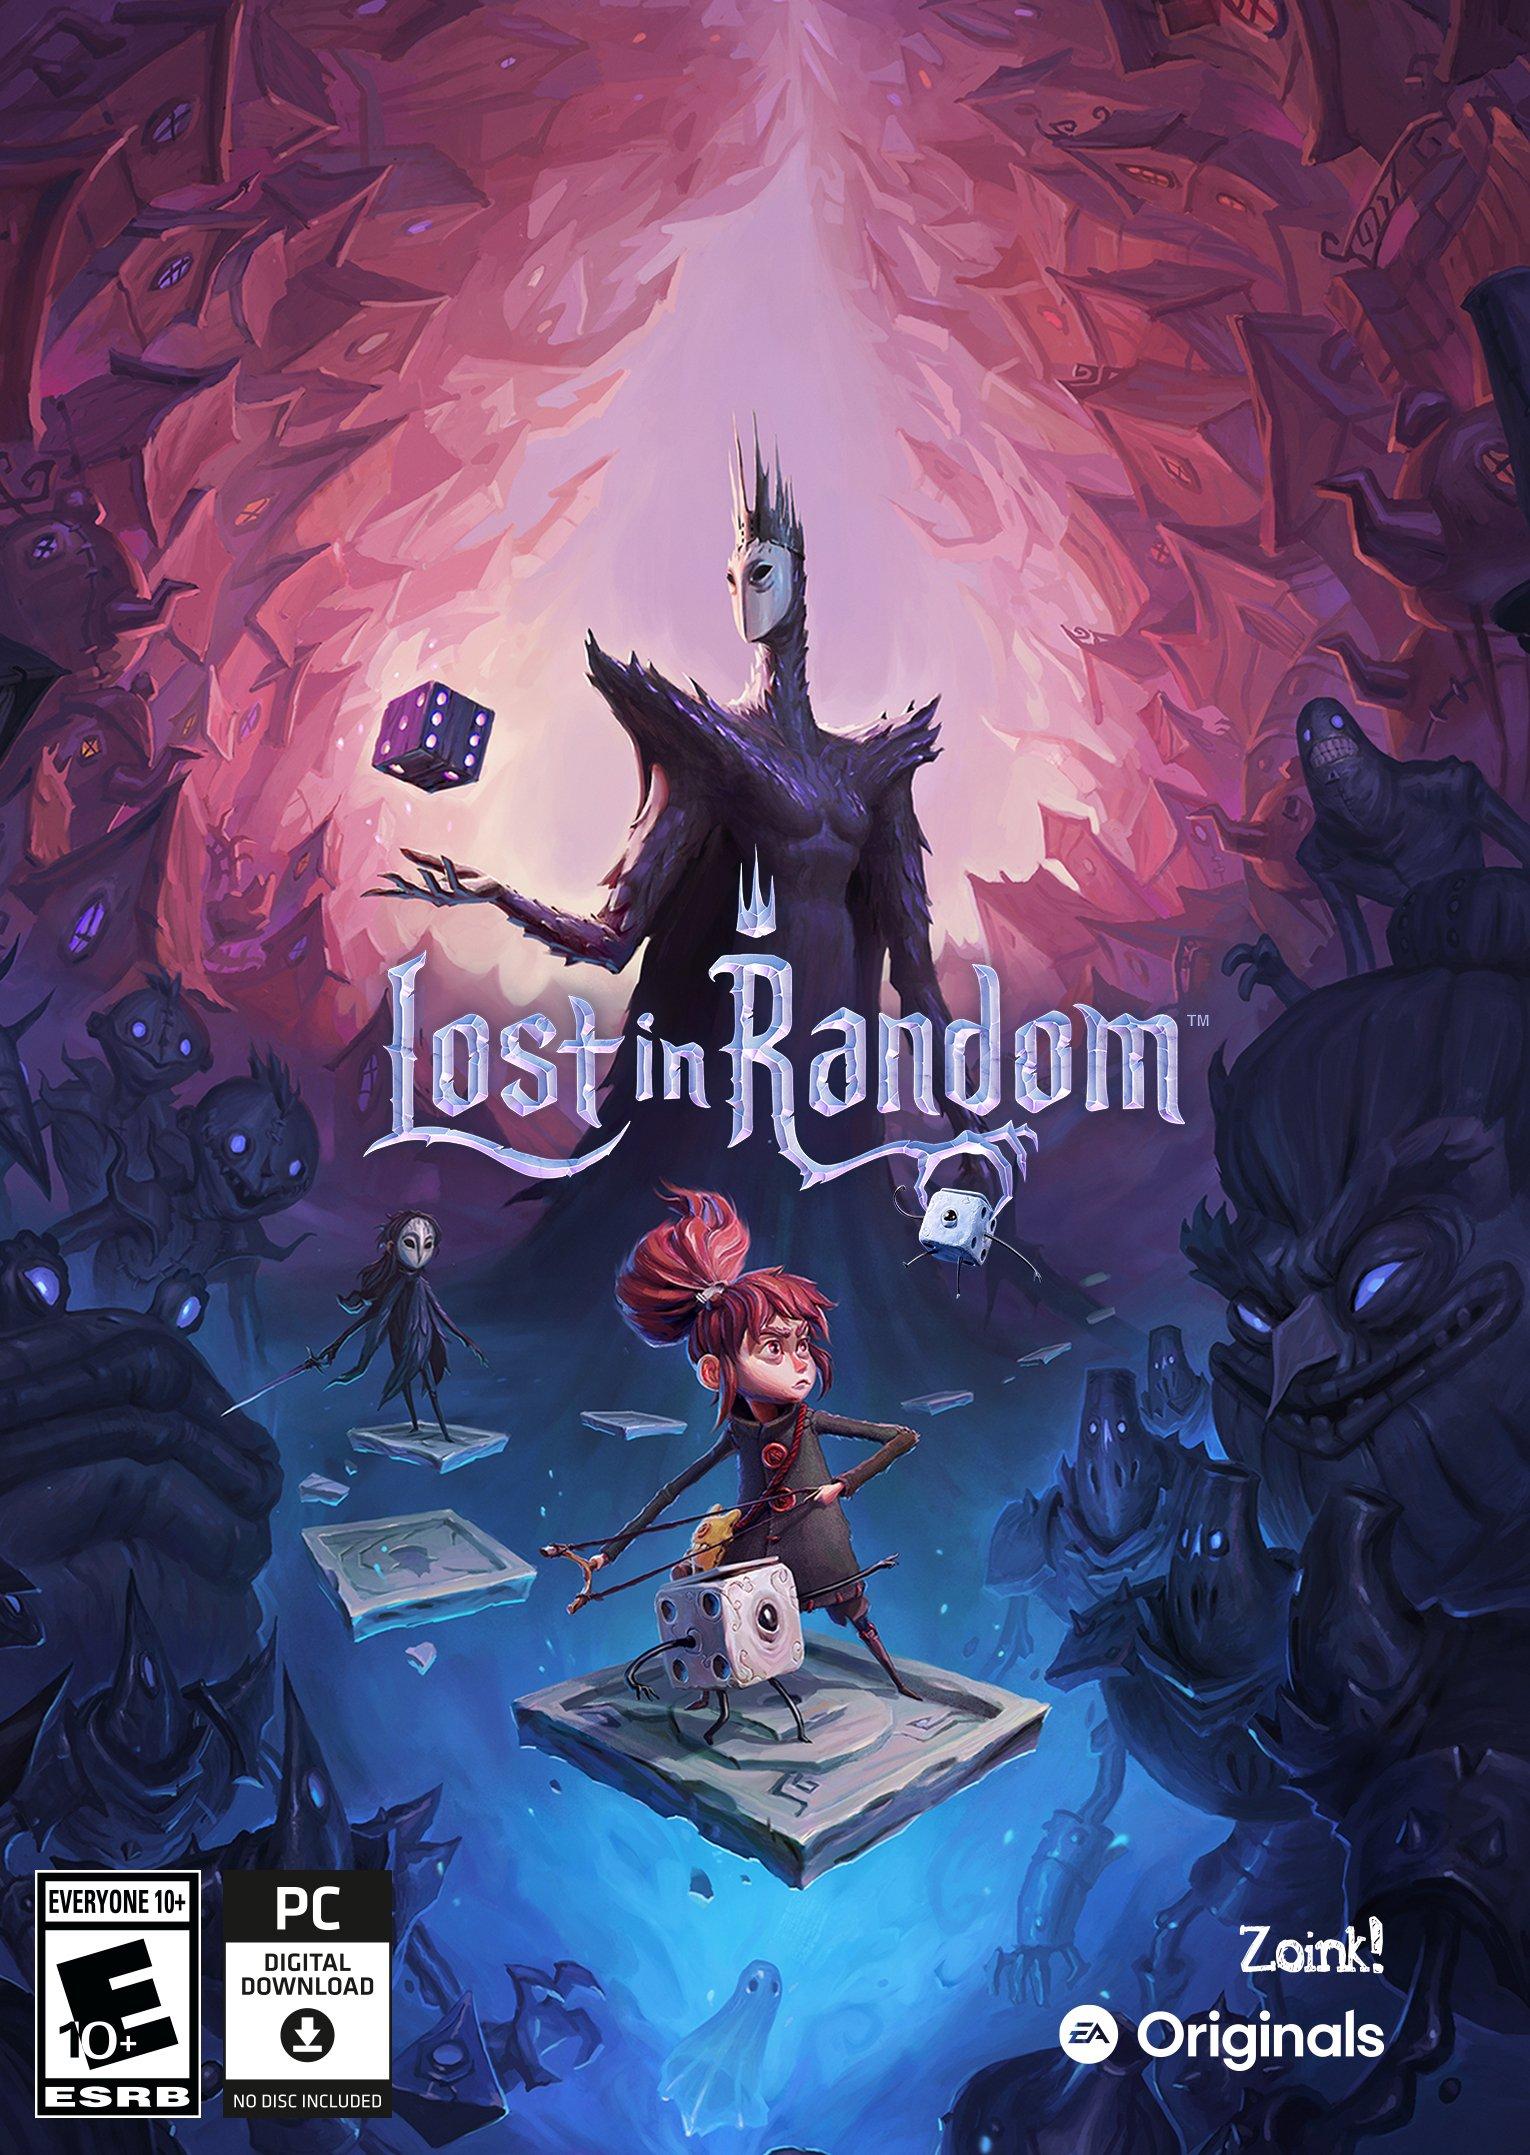 Lost in Random to release on PC and consoles later this summer